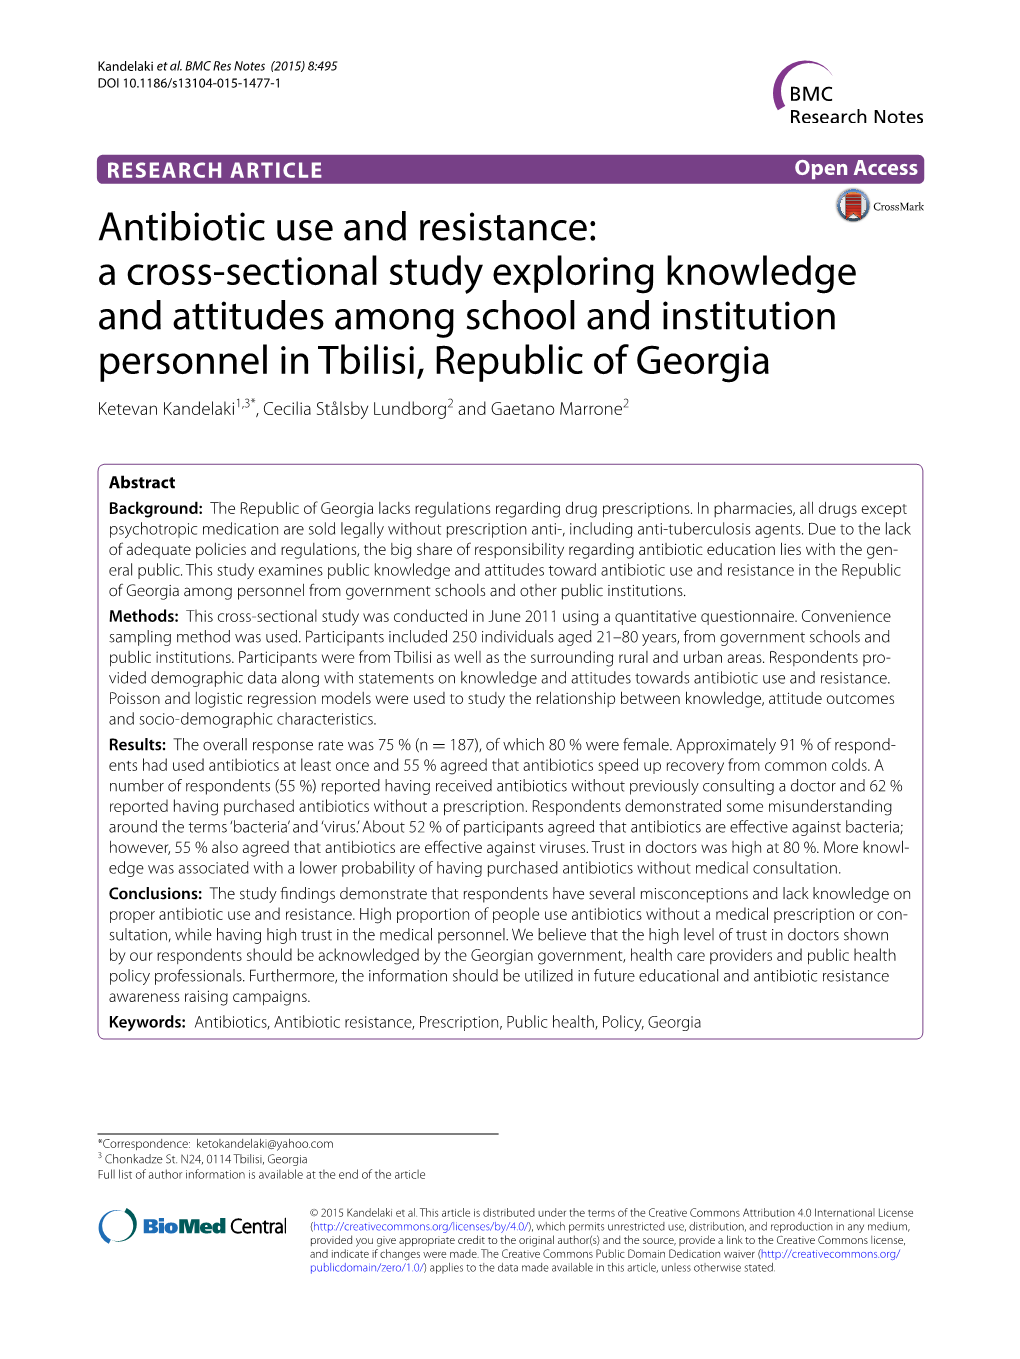 Antibiotic Use and Resistance: a Cross-Sectional Study Exploring